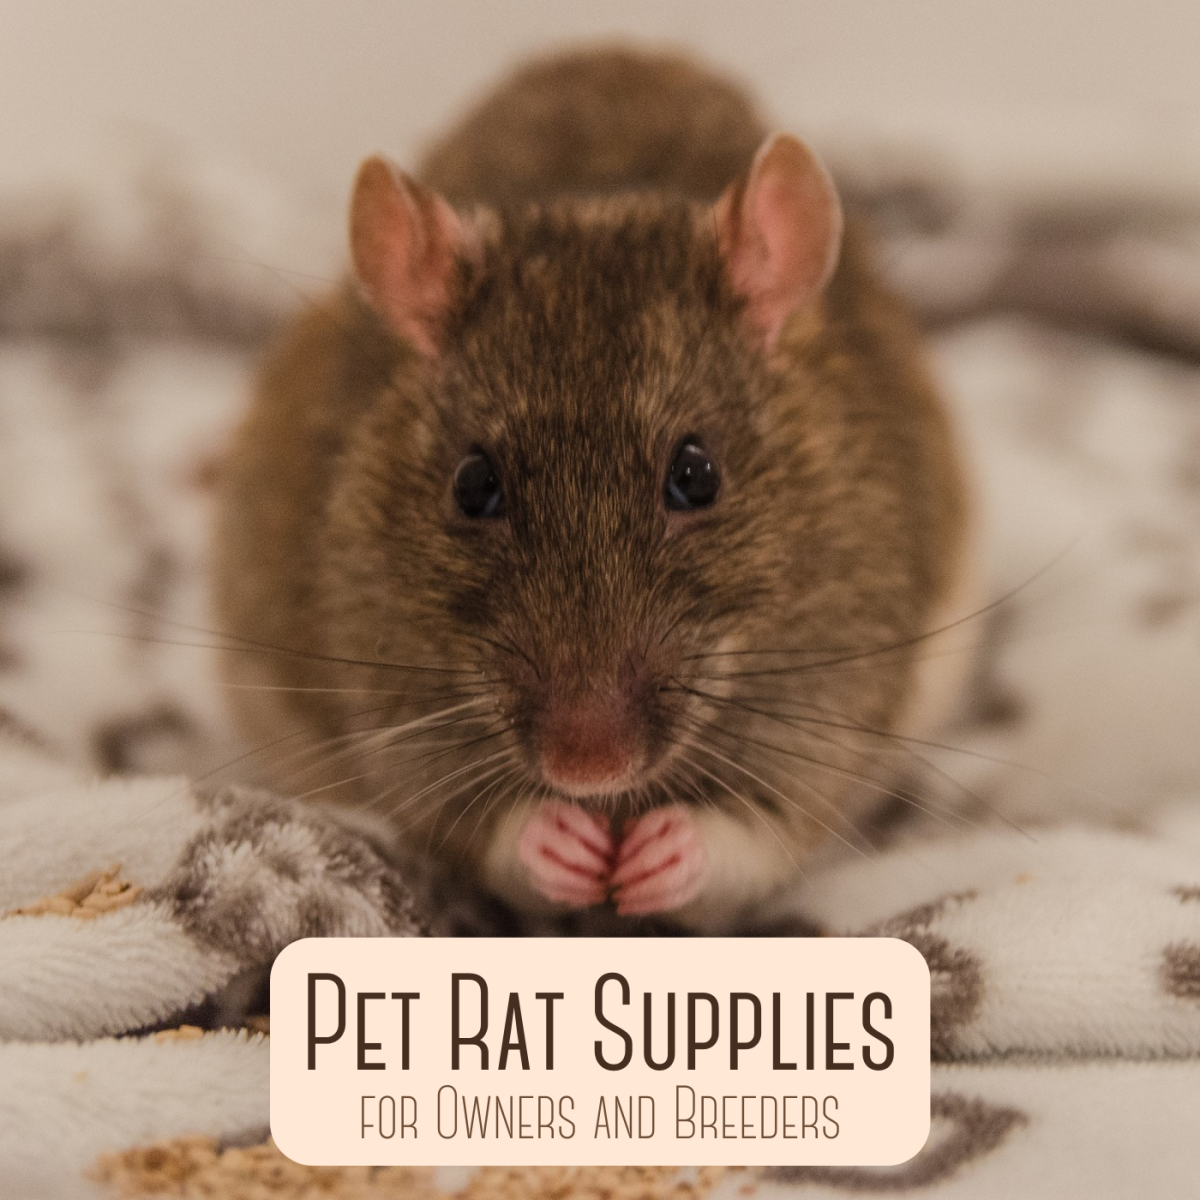 Fancy pet rats require certain supplies, cages, and care from their owners. Are you able to commit to a new furry friend?